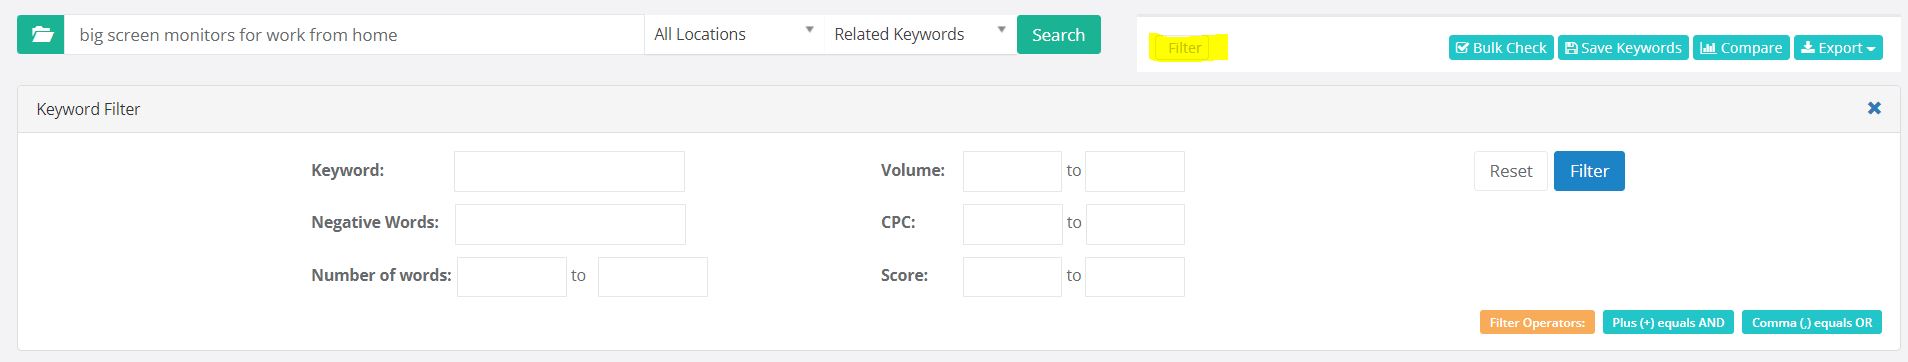 Keysearch - keyword research filter options